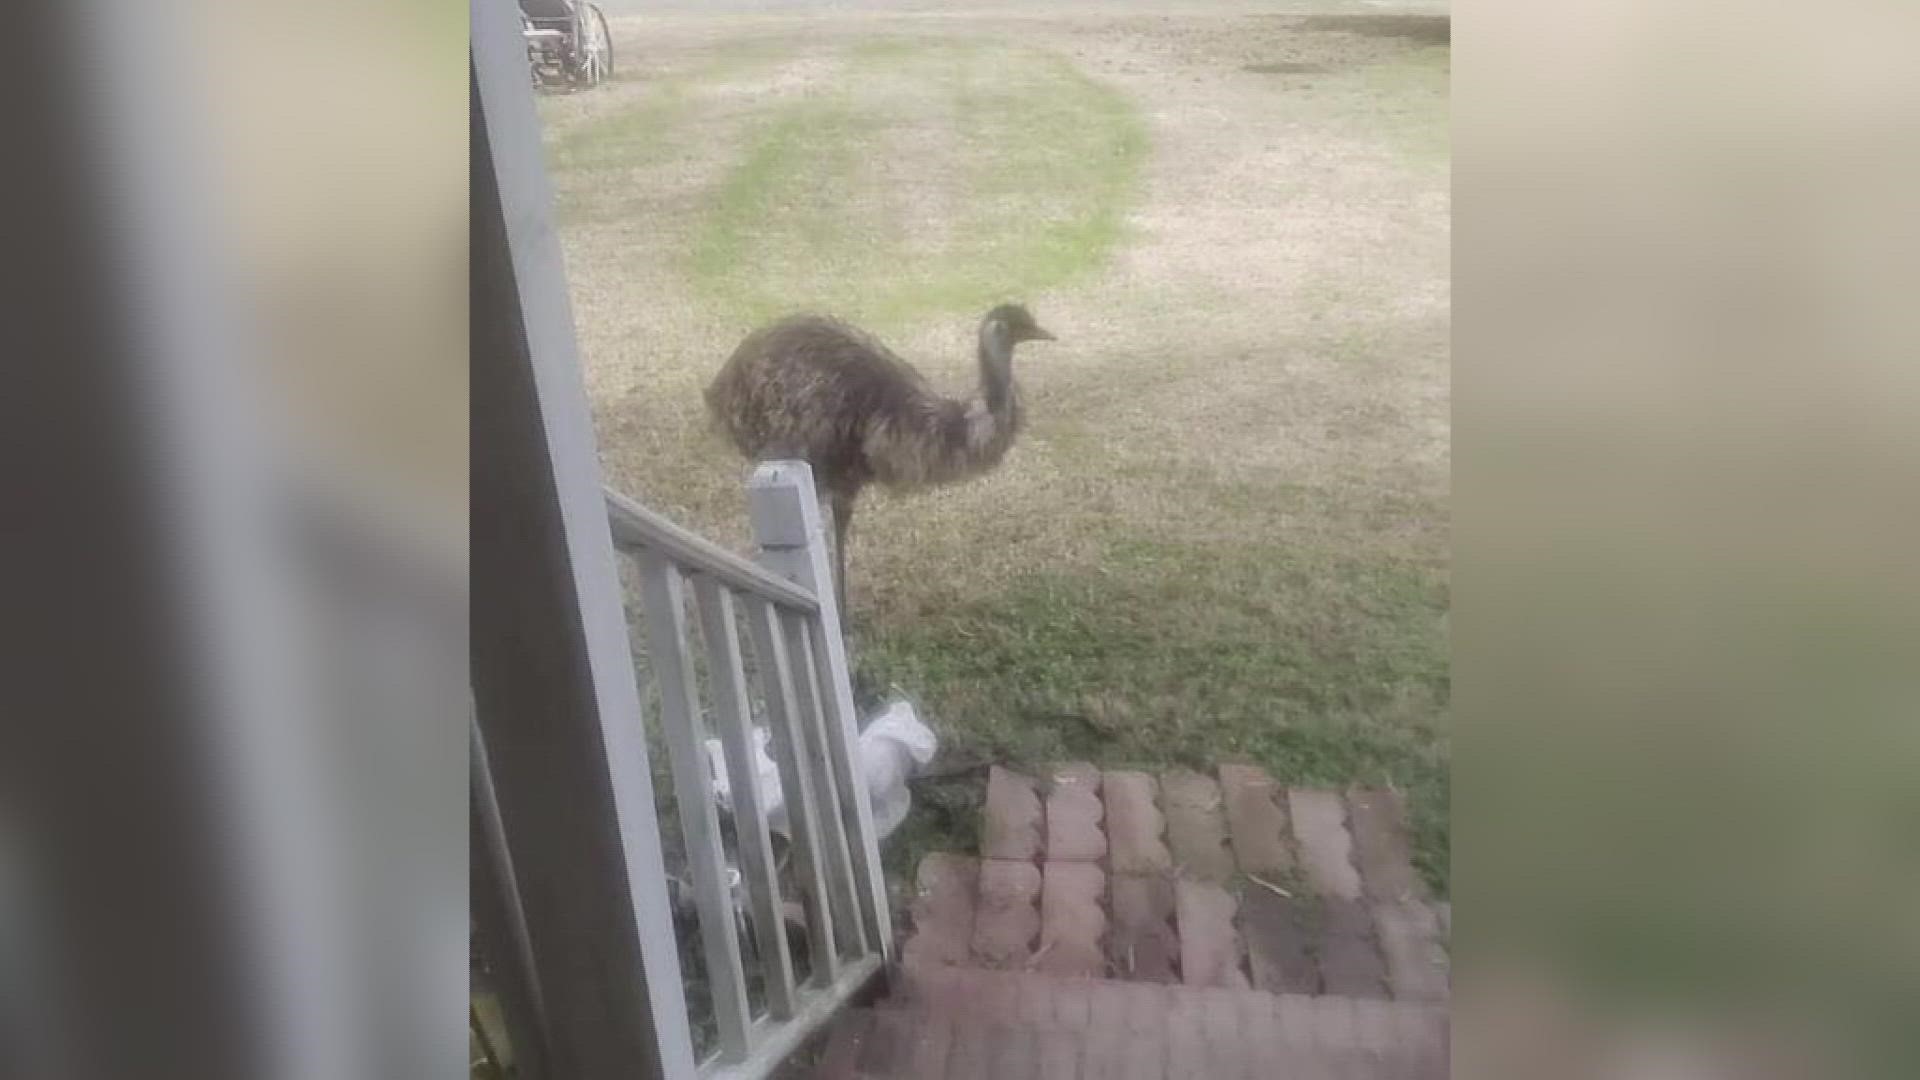 Doug the emu safely returned home on Tuesday after escaping from his home in Person County, North Carolina